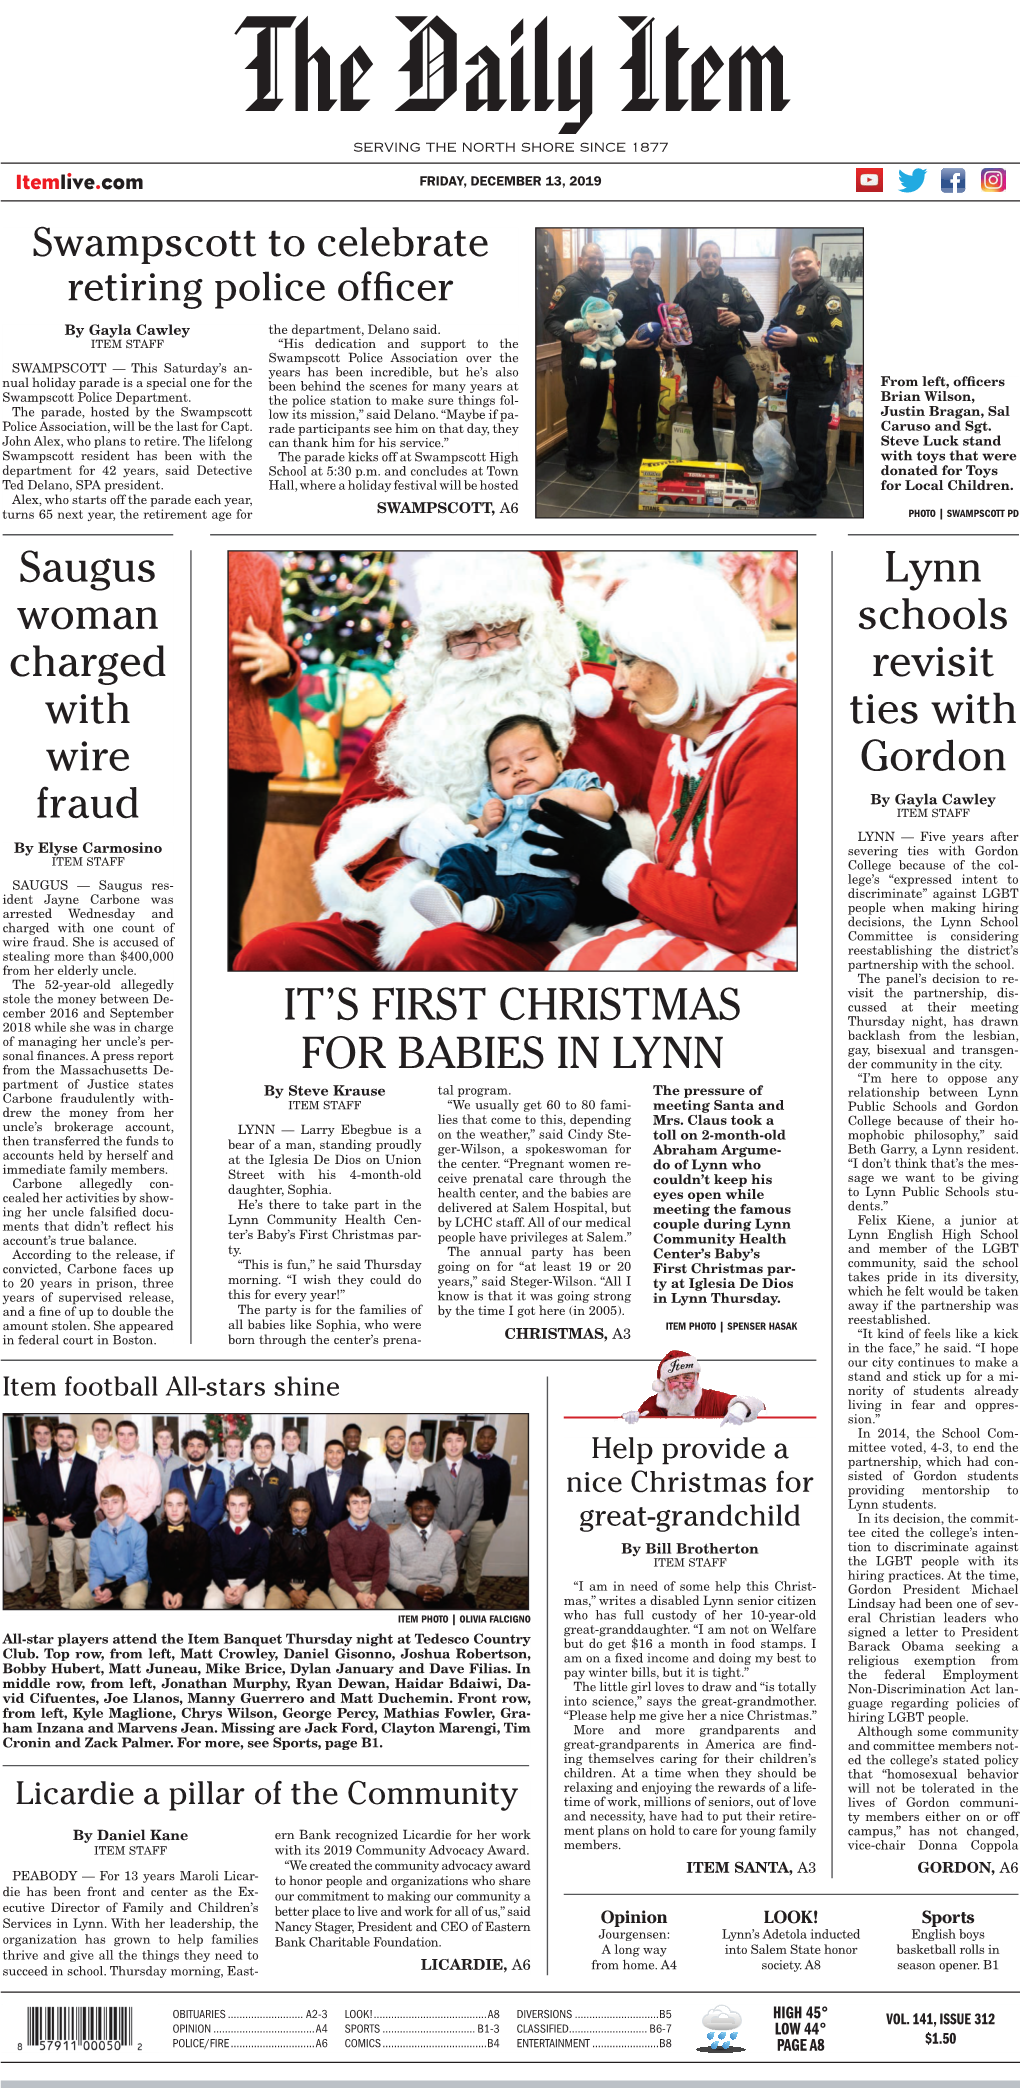 It's First Christmas for Babies in Lynn